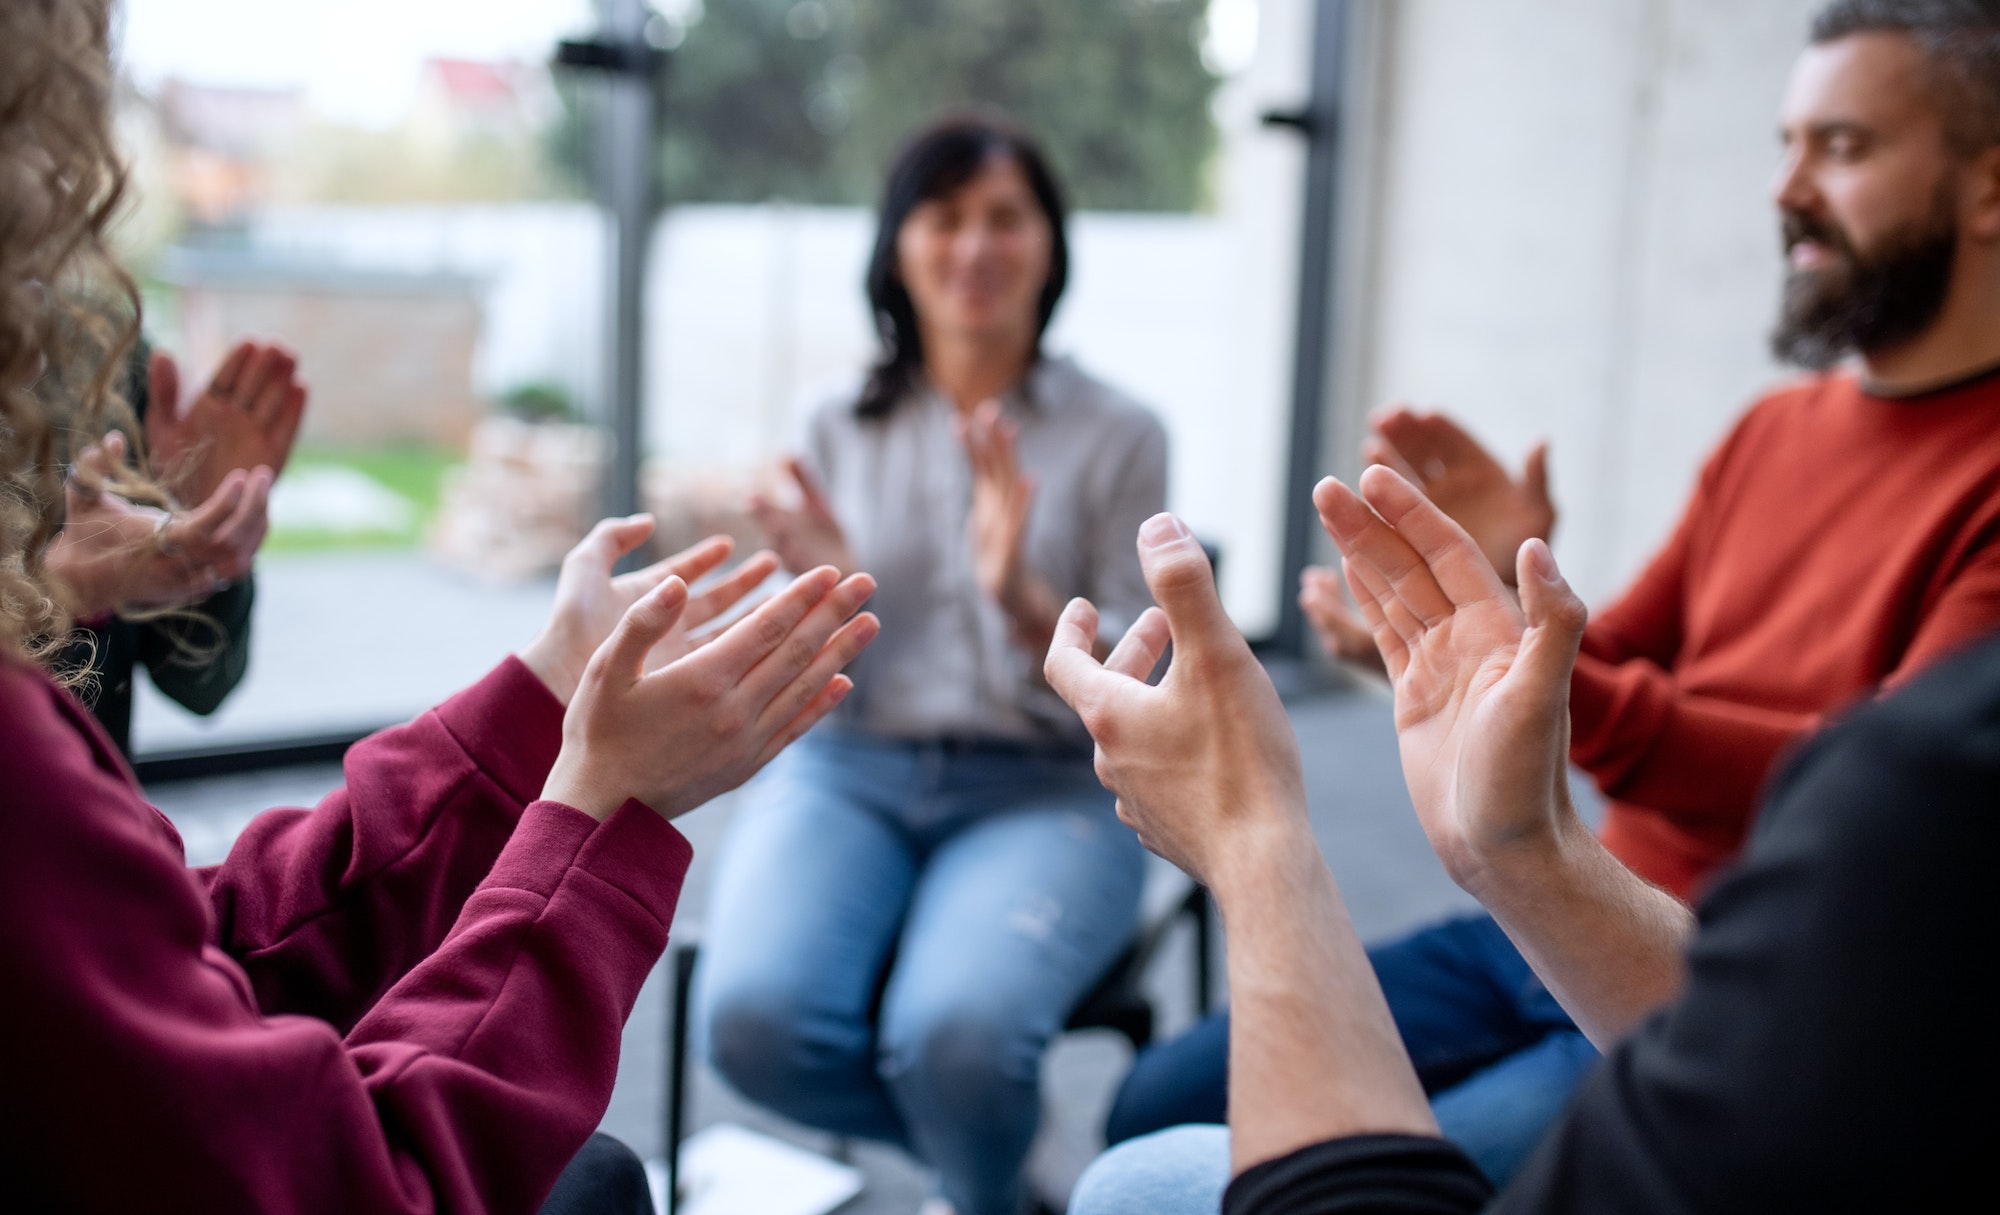 Men and women sitting in circle during group therapy, clapping